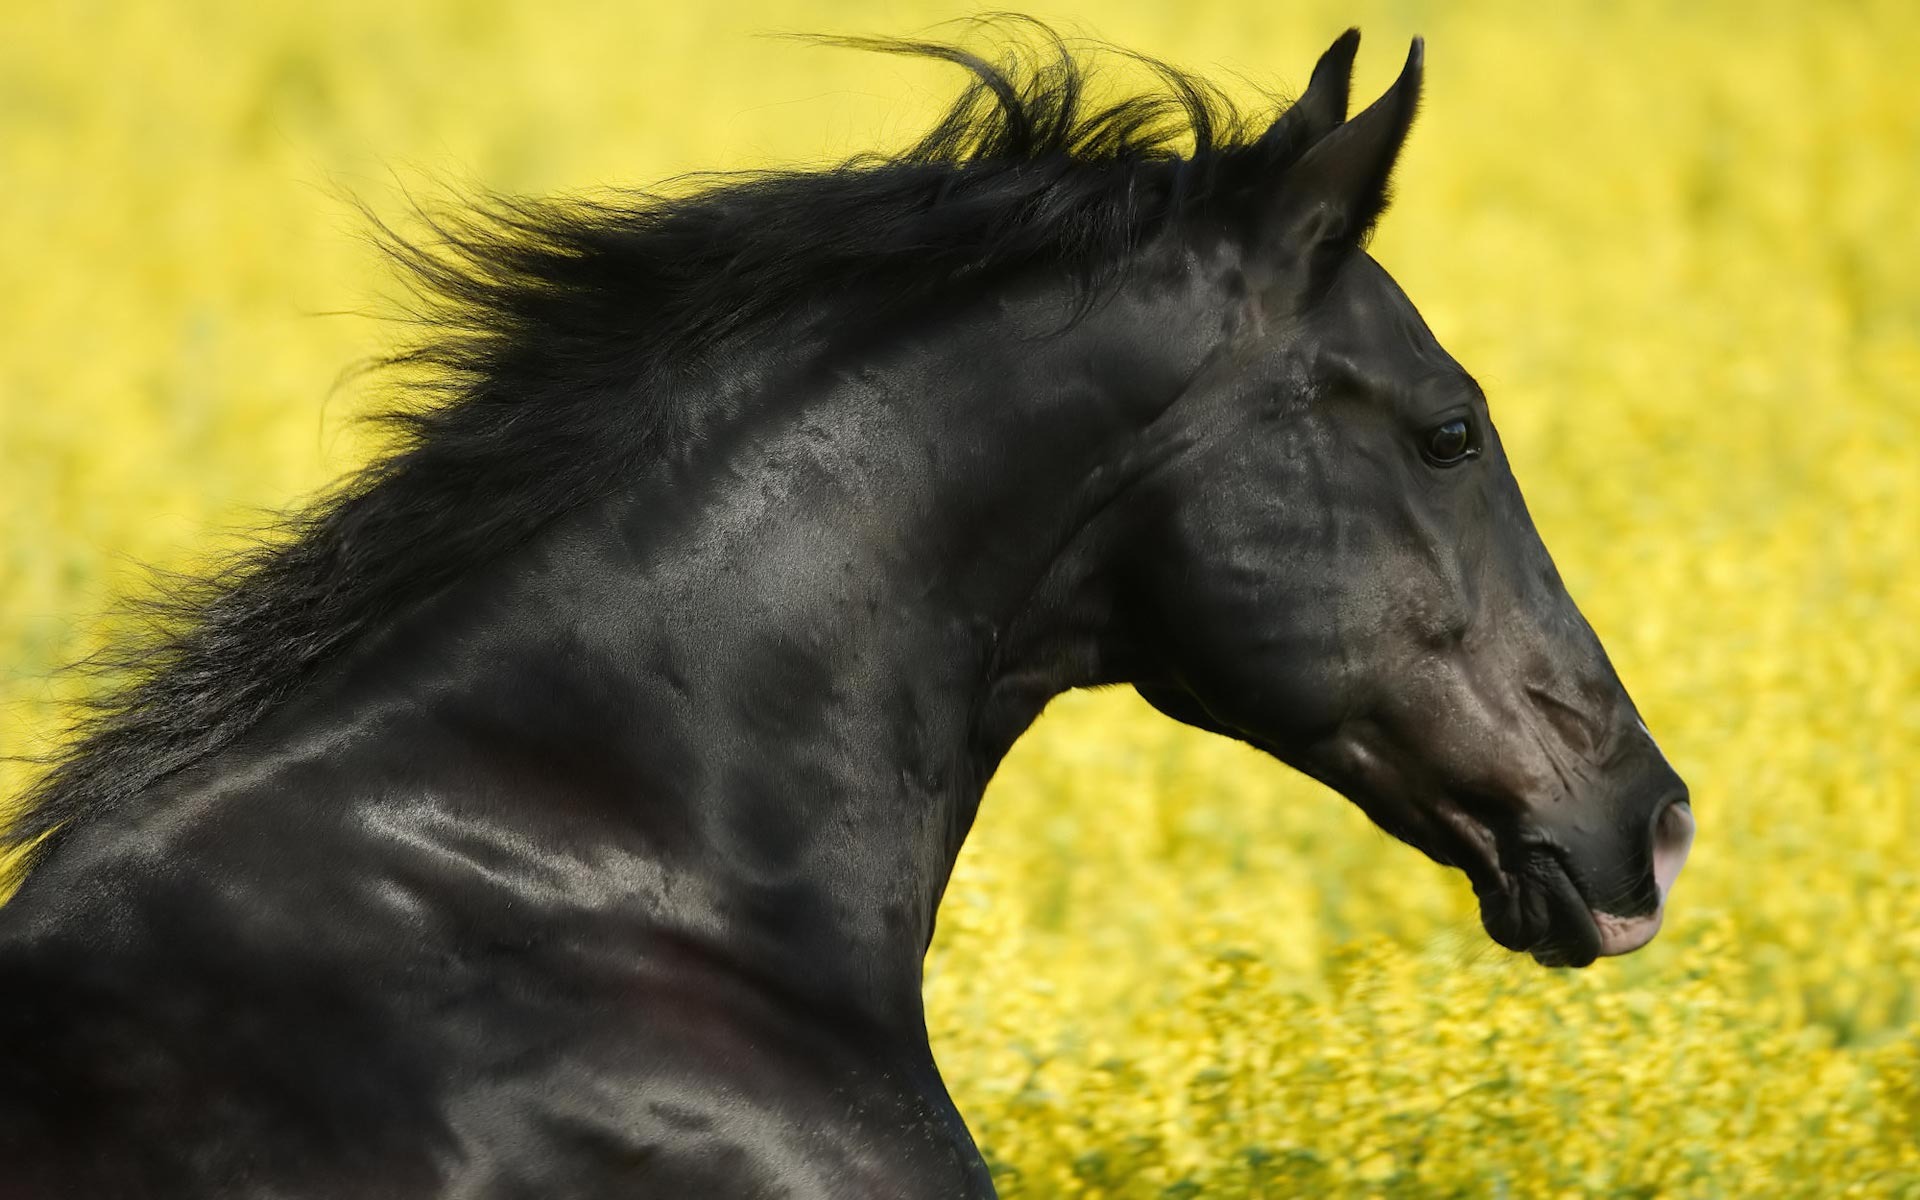 Black Horse Hd Photo - Black Horse Images Free Download , HD Wallpaper & Backgrounds